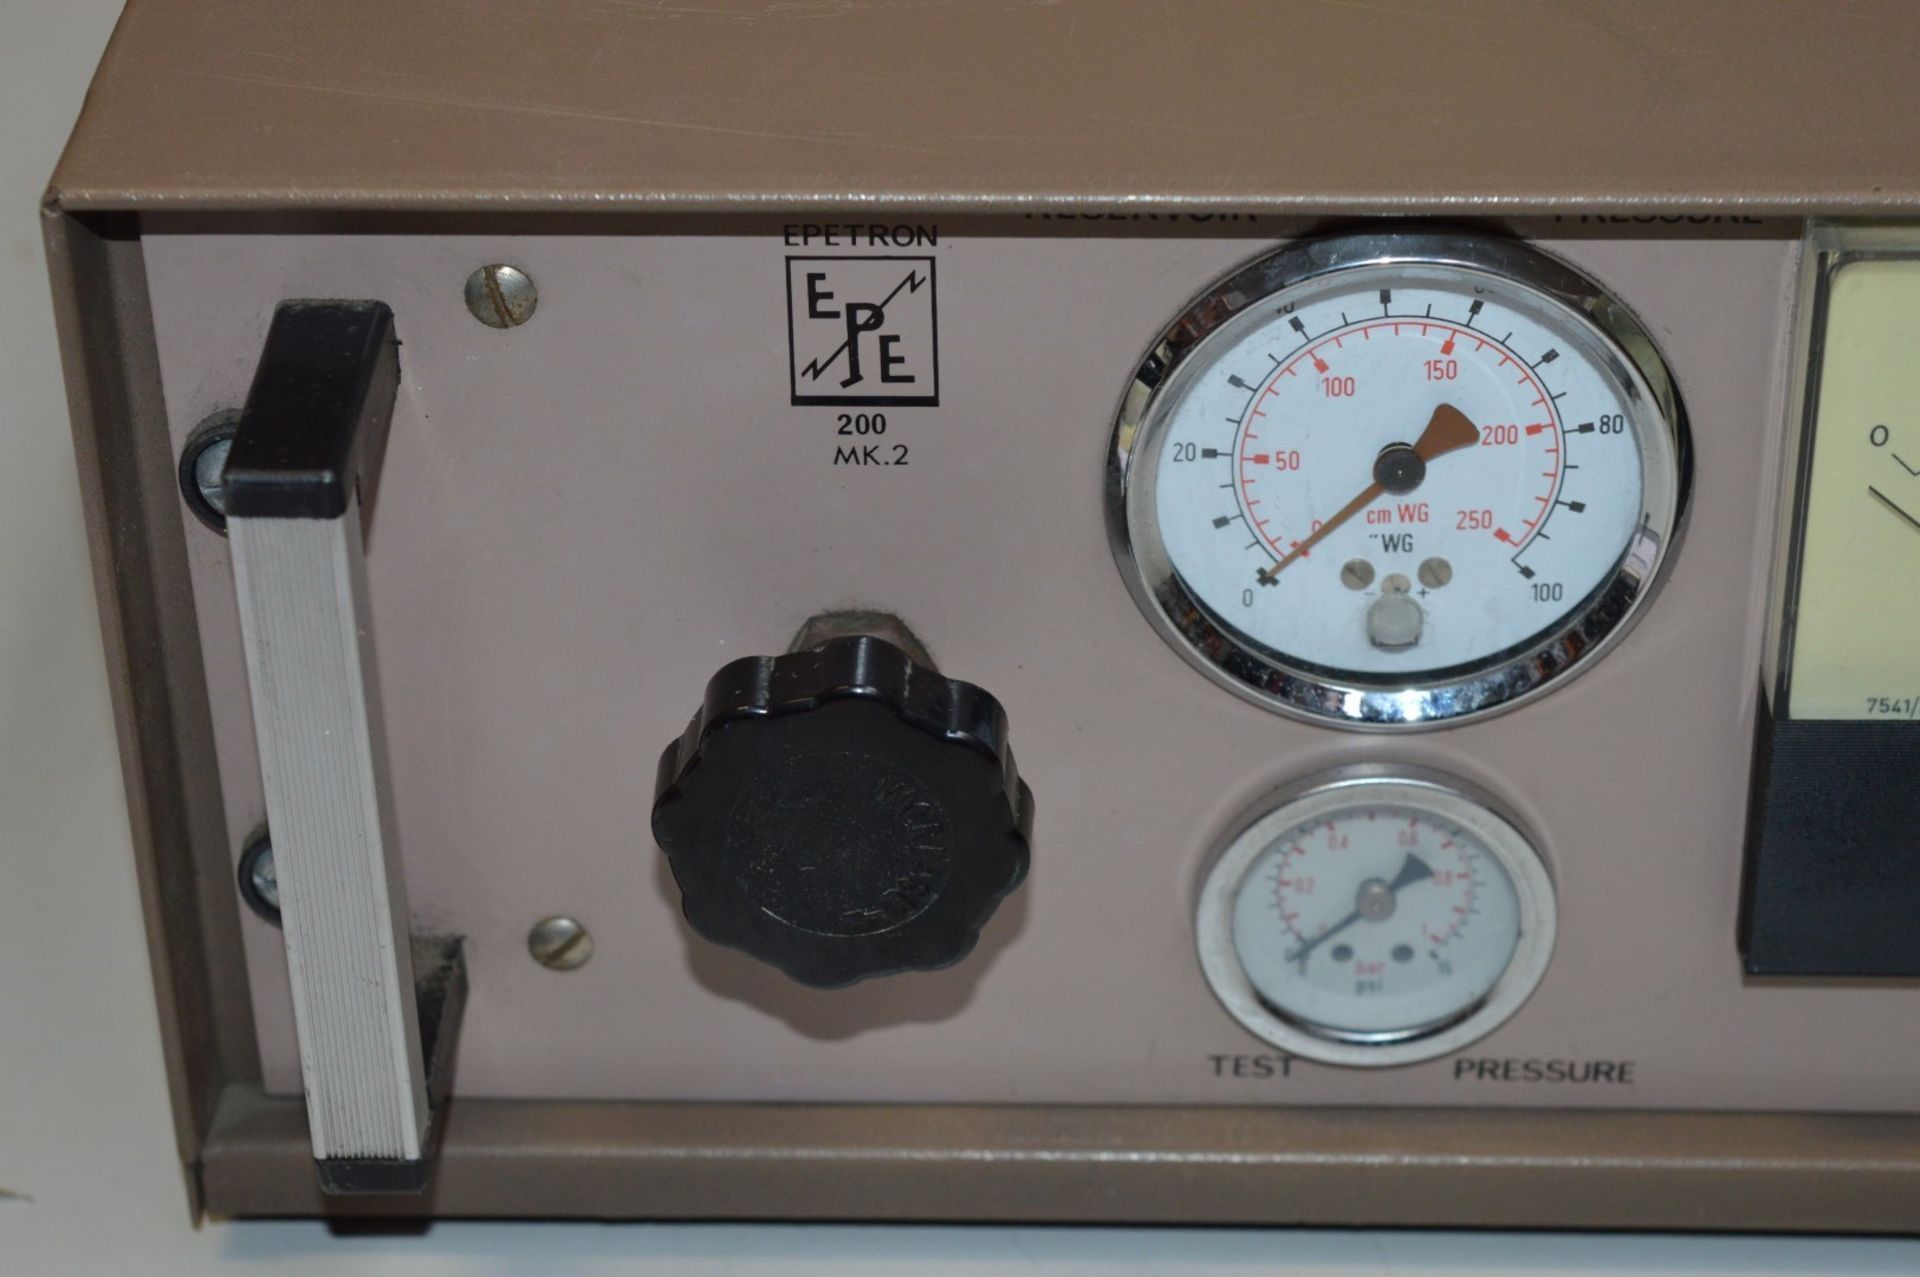 1 x Epetron 200 Mk2 Electro Pneumatic Tester - Vintage Test Equipment - CL011 - Ref J611 - Location: - Image 8 of 8